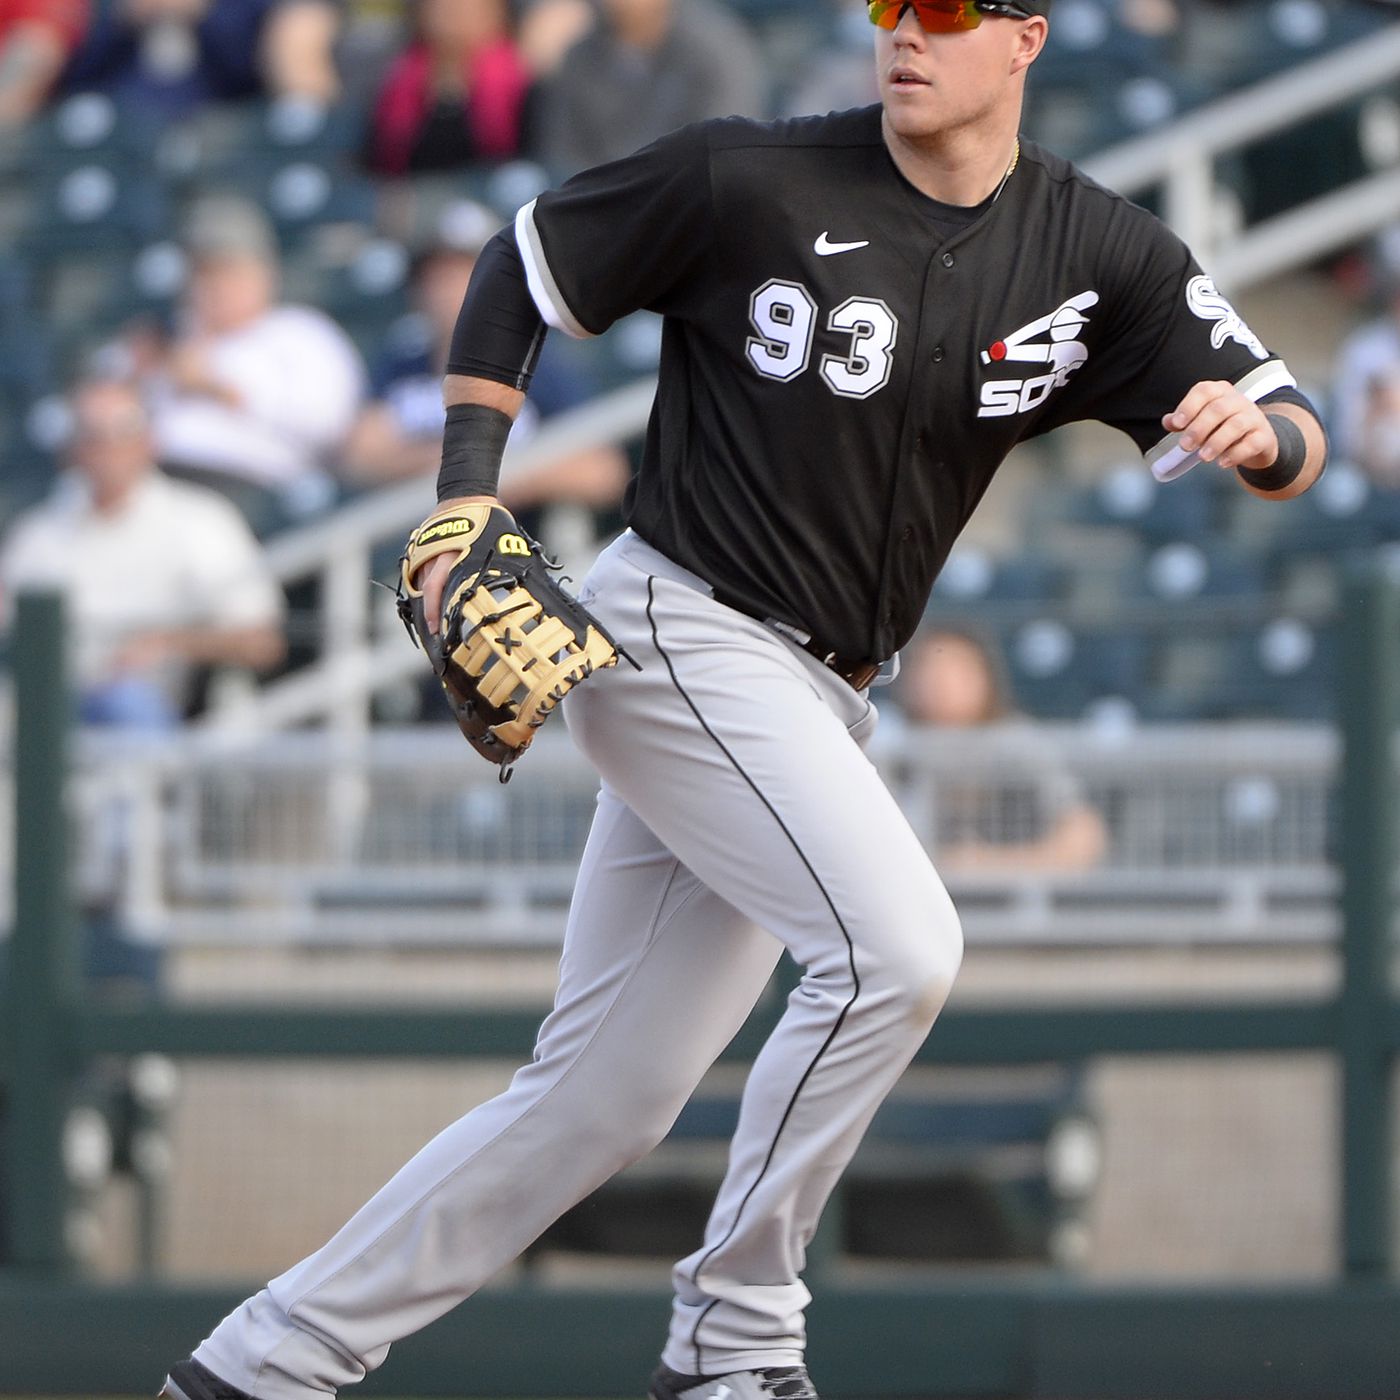 Welcome to the White Sox and The Show, Gavin Sheets! - South Side Sox